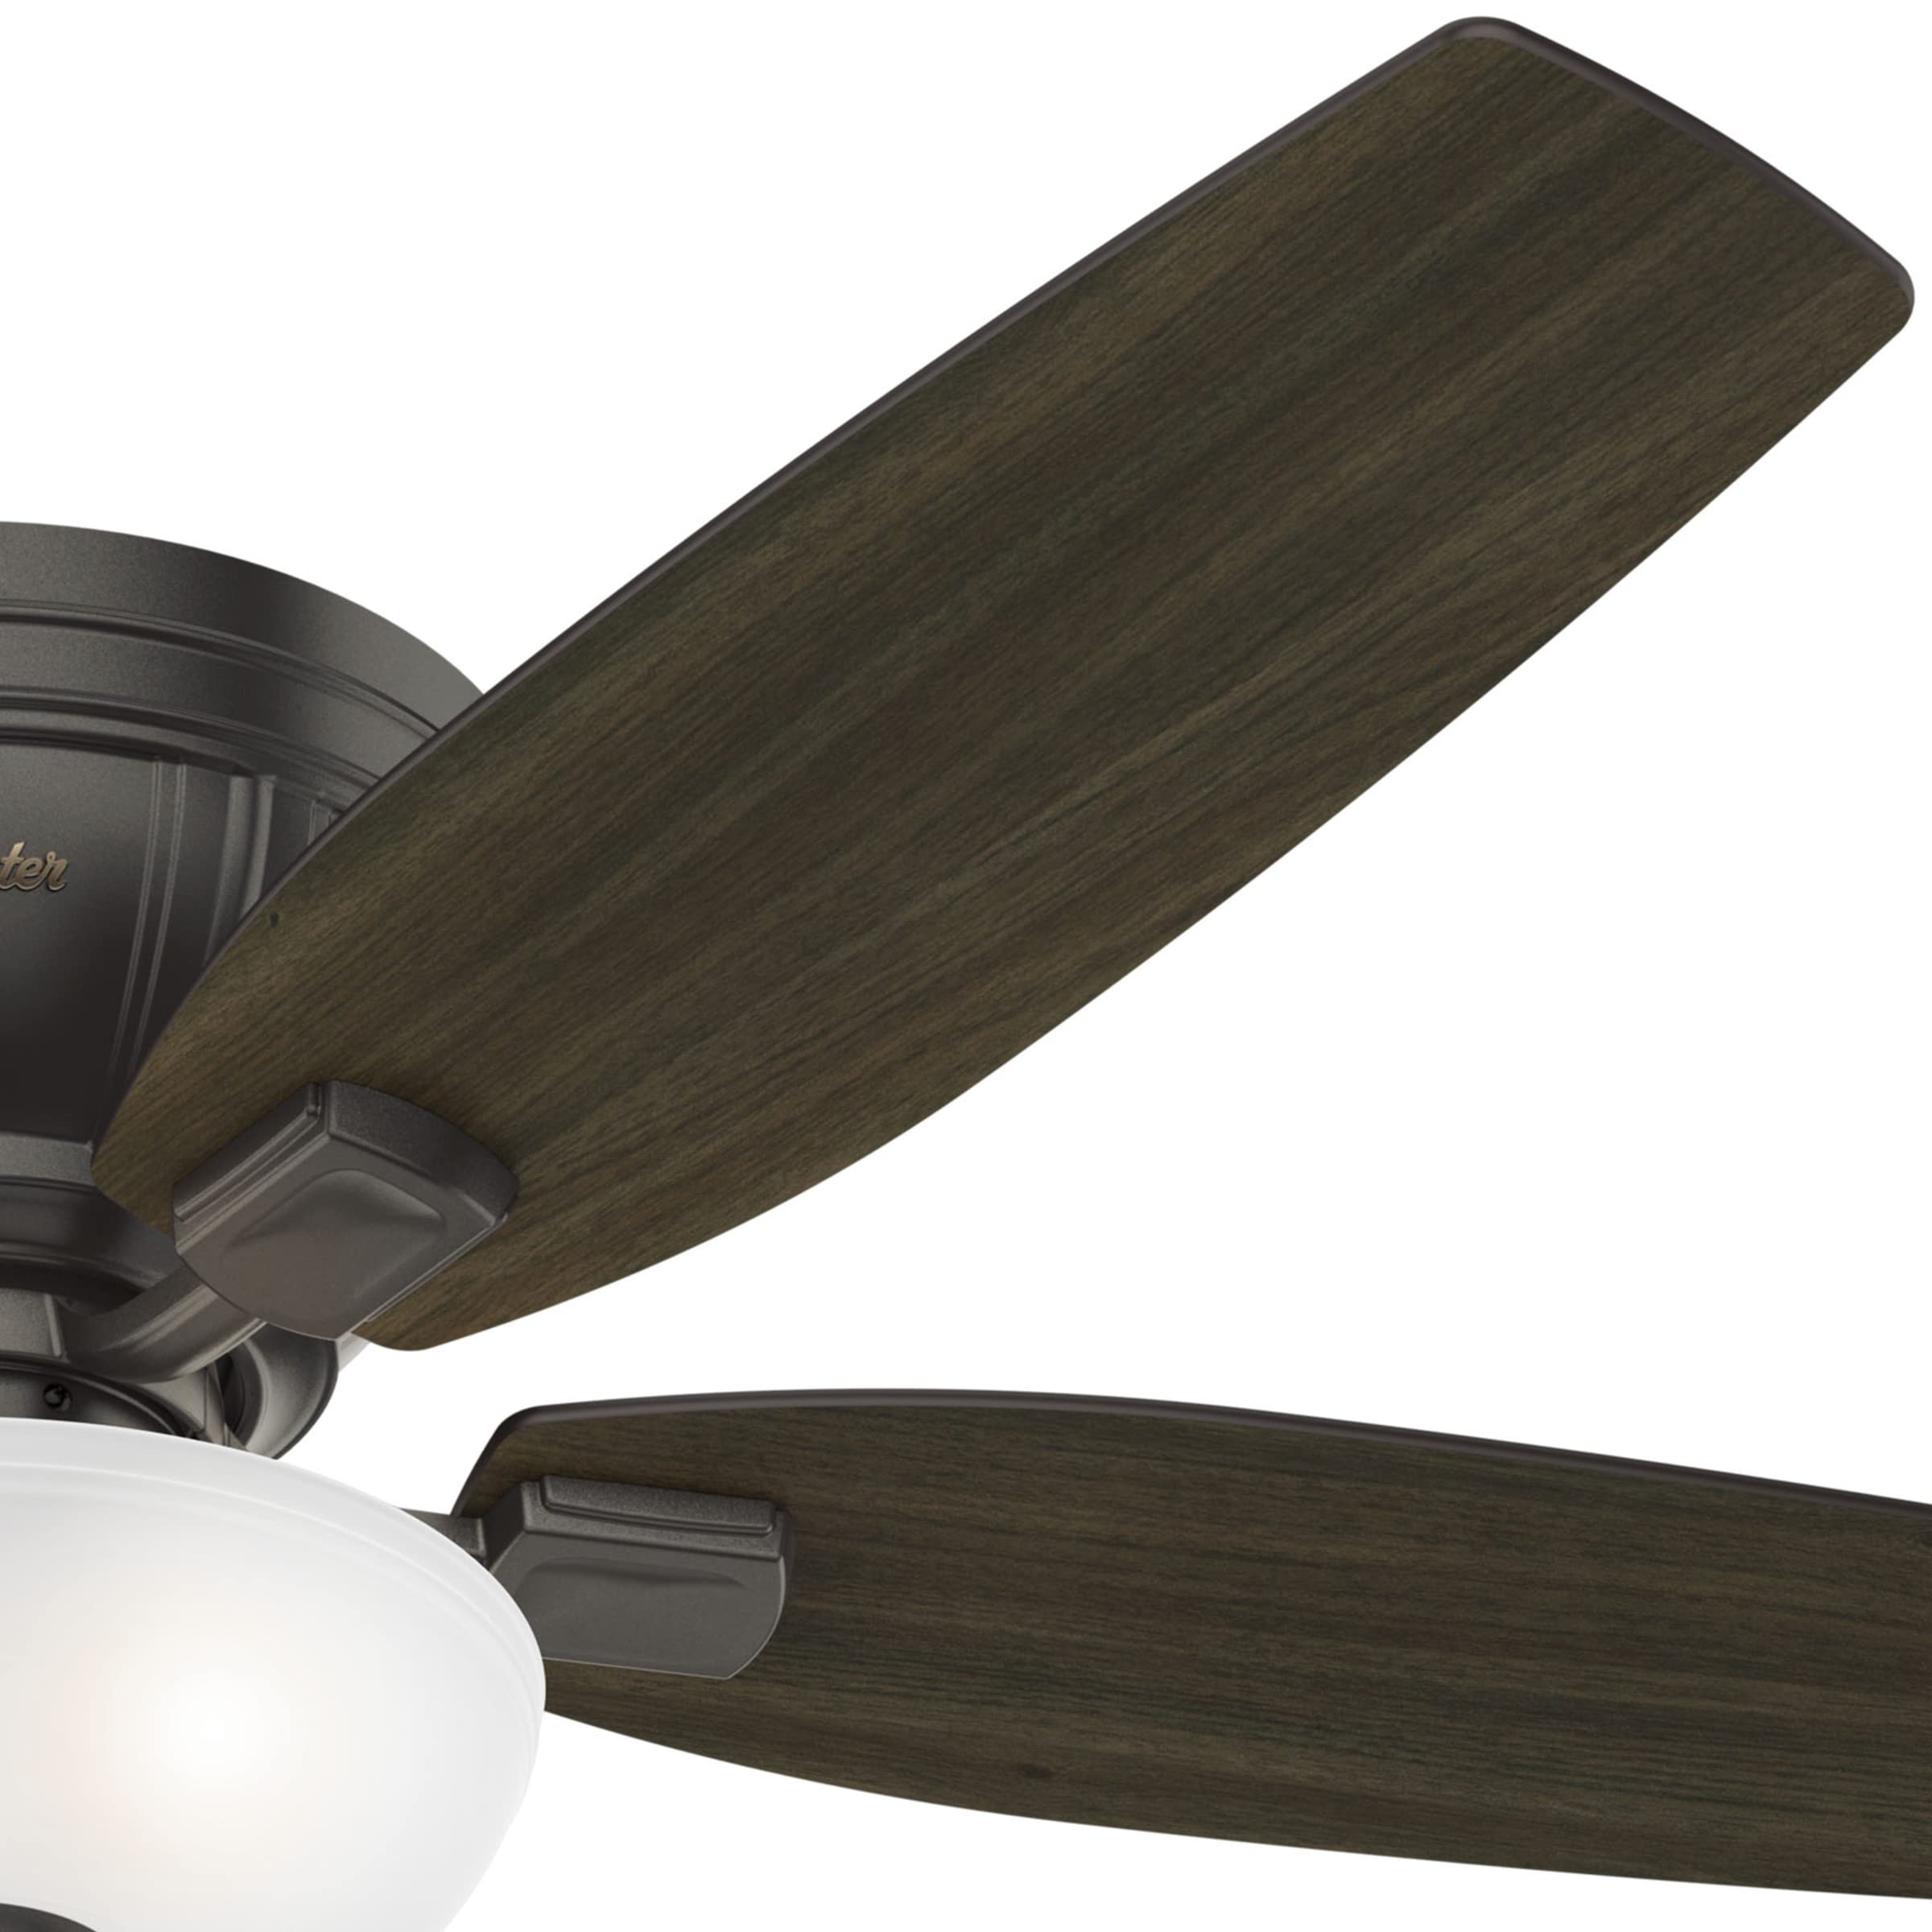 Hunter Fan Company 53379 Hunter Kenbridge Indoor Low Profile Ceiling Fan with LED Light and Pull Chain Control, Large, Noble Bronze Finish